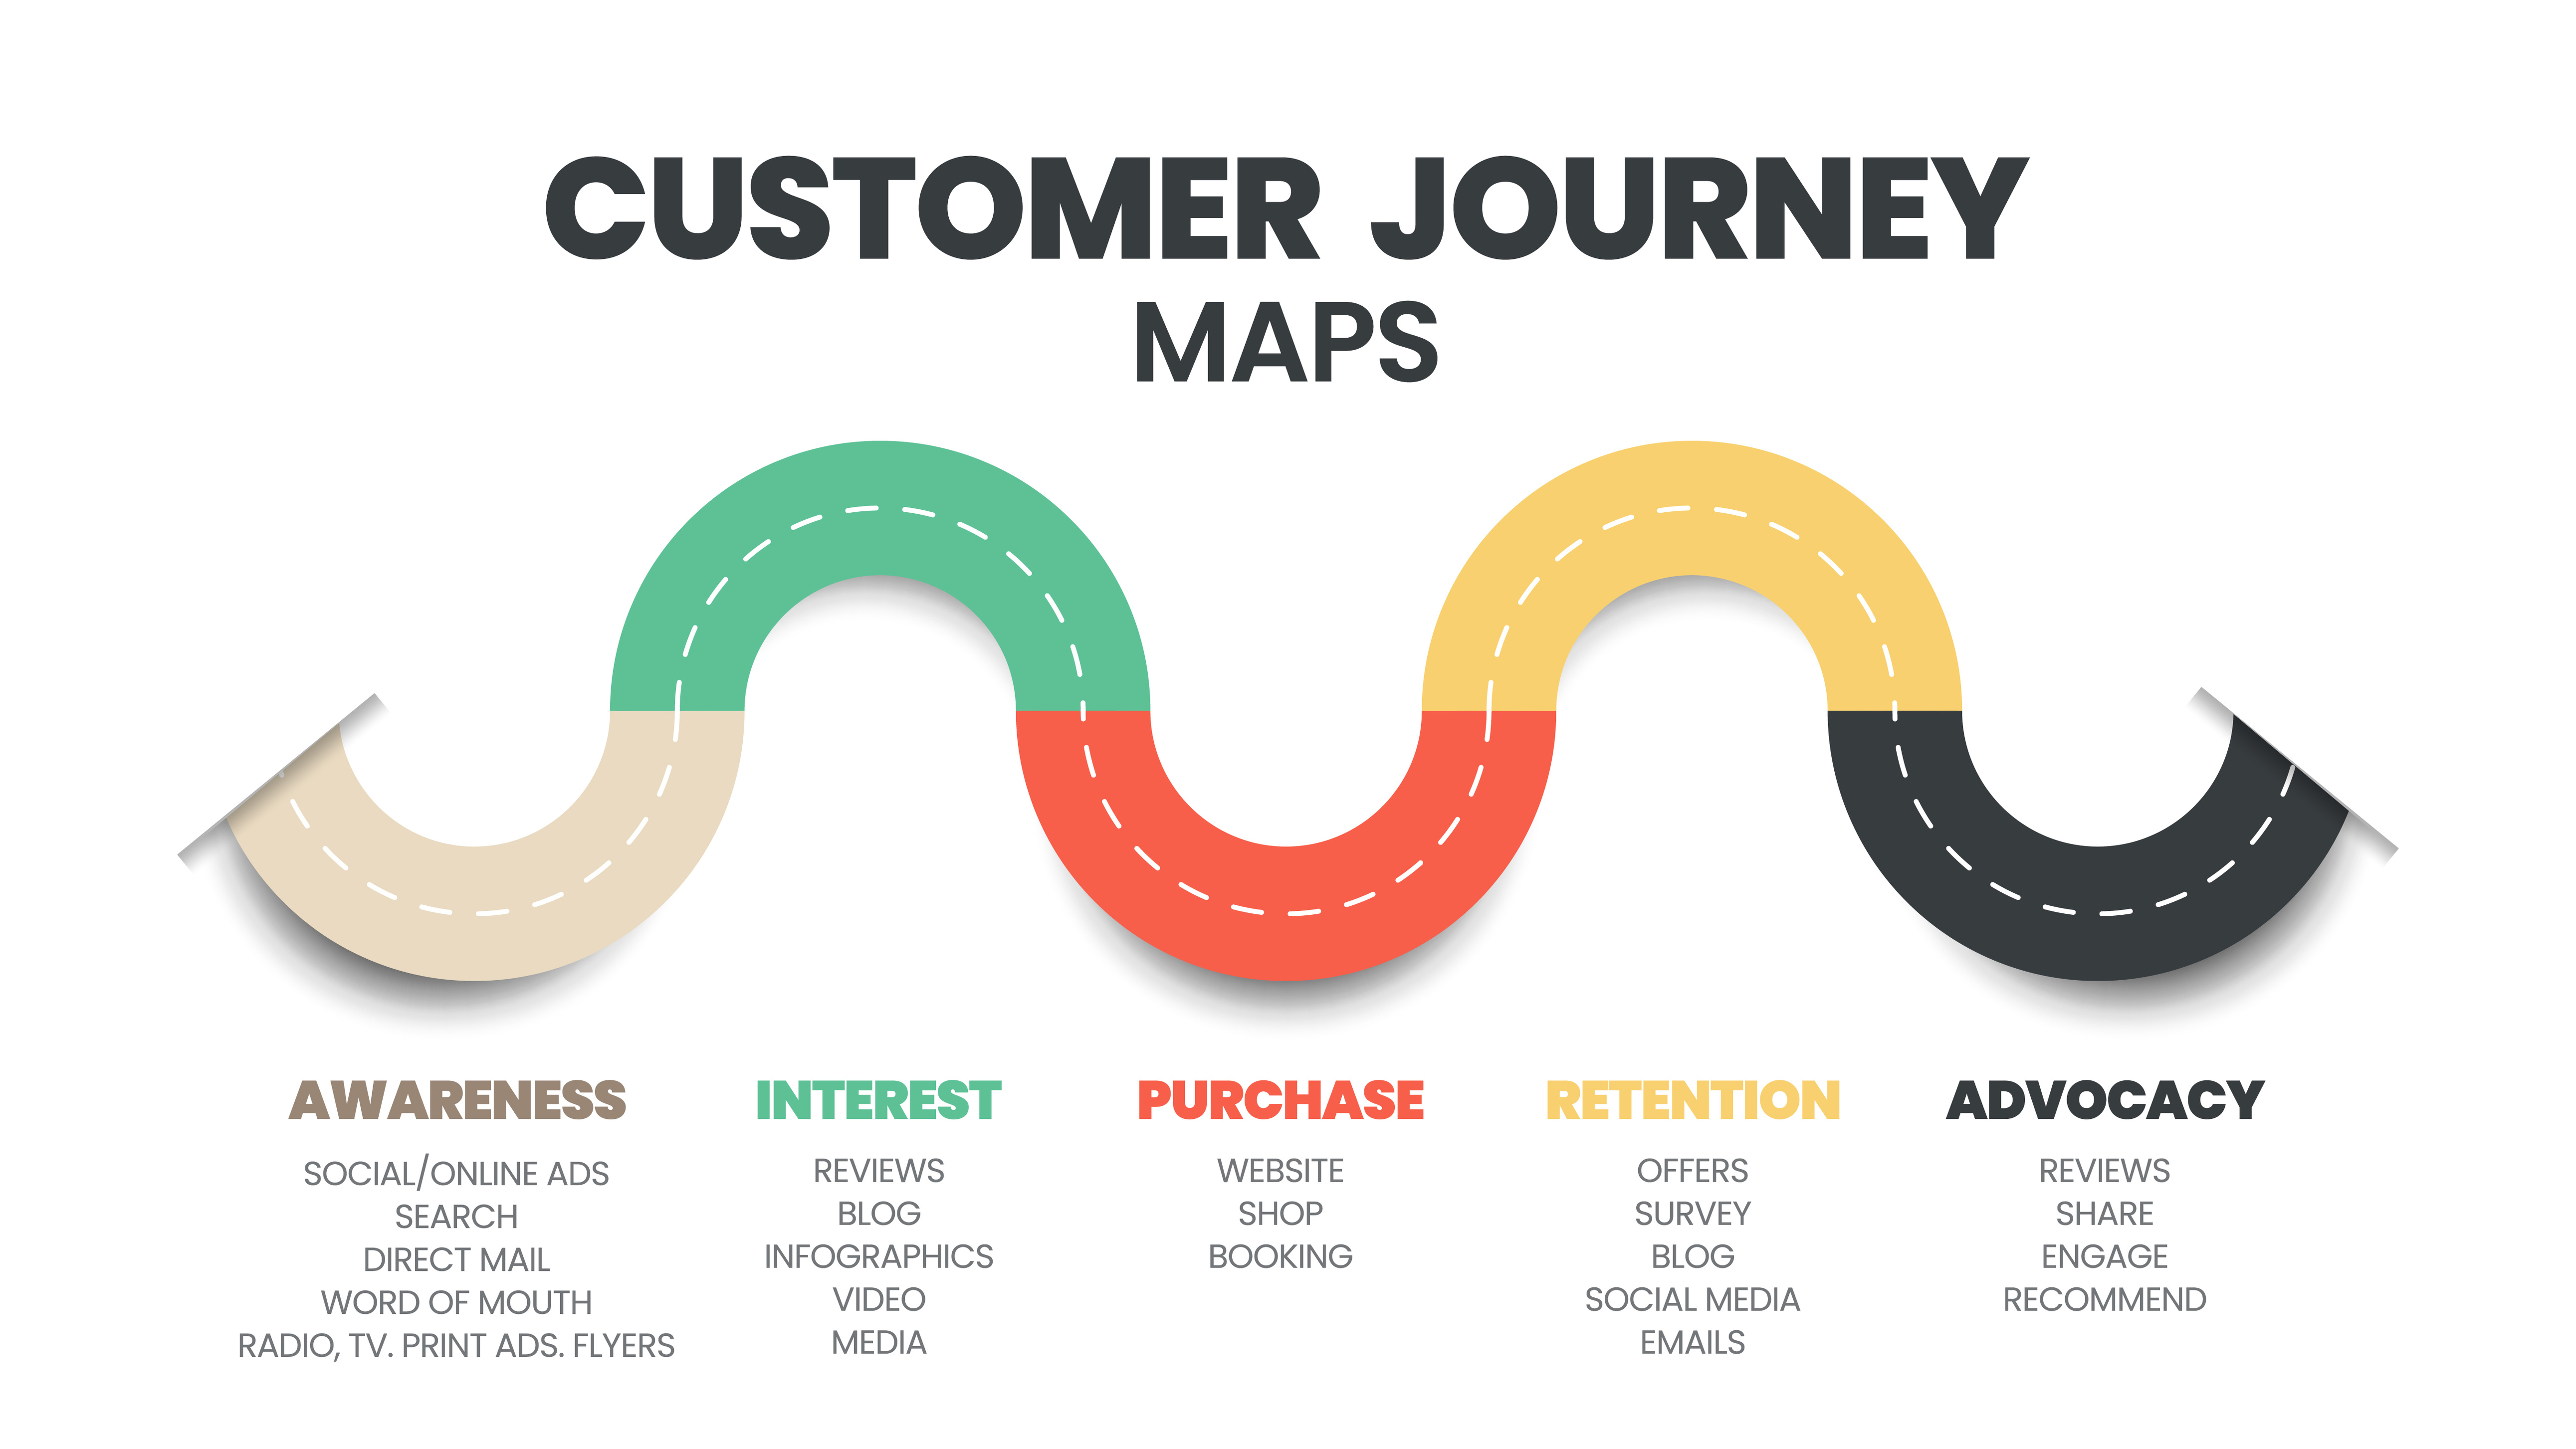 A visual depiction of an omnichannel customer journey map with 5 stages